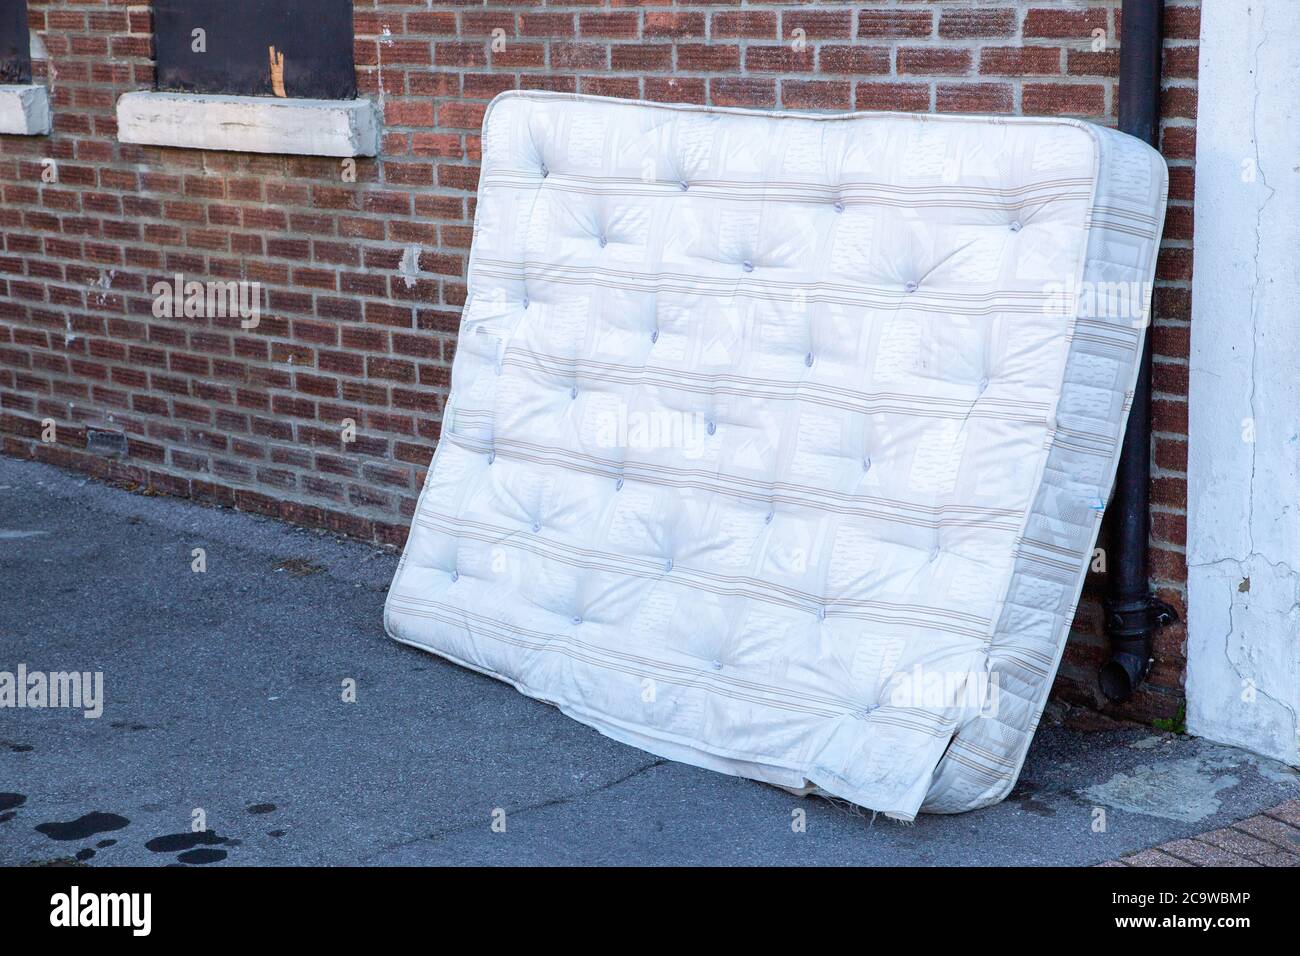 A mattress dumped or fly tipped in the street Stock Photo